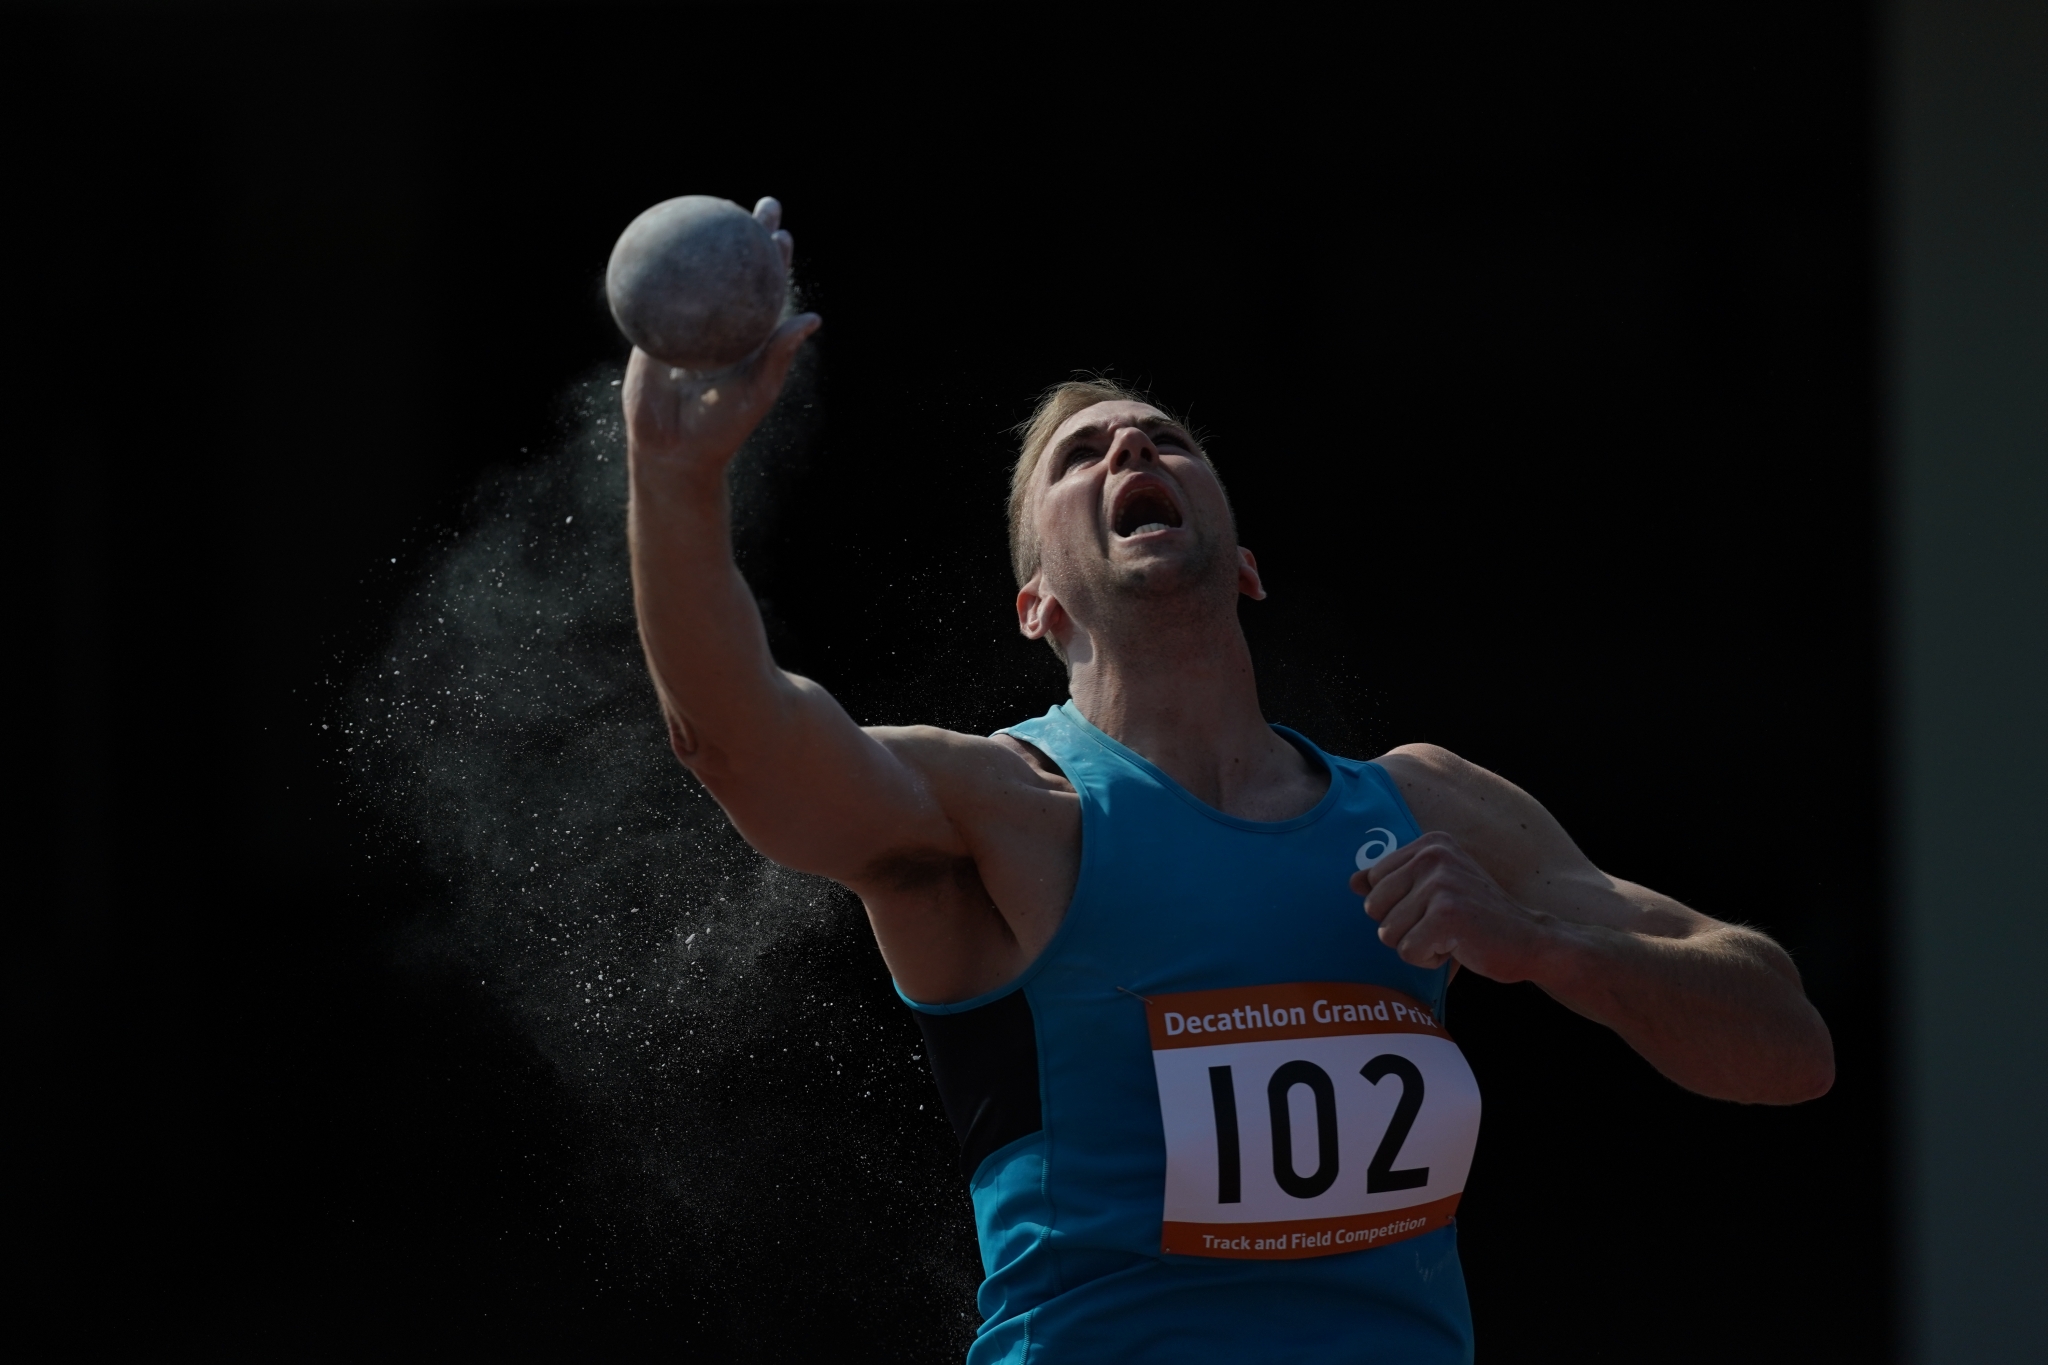 Male athlete throwing shotput, arm raised as he releases the ball